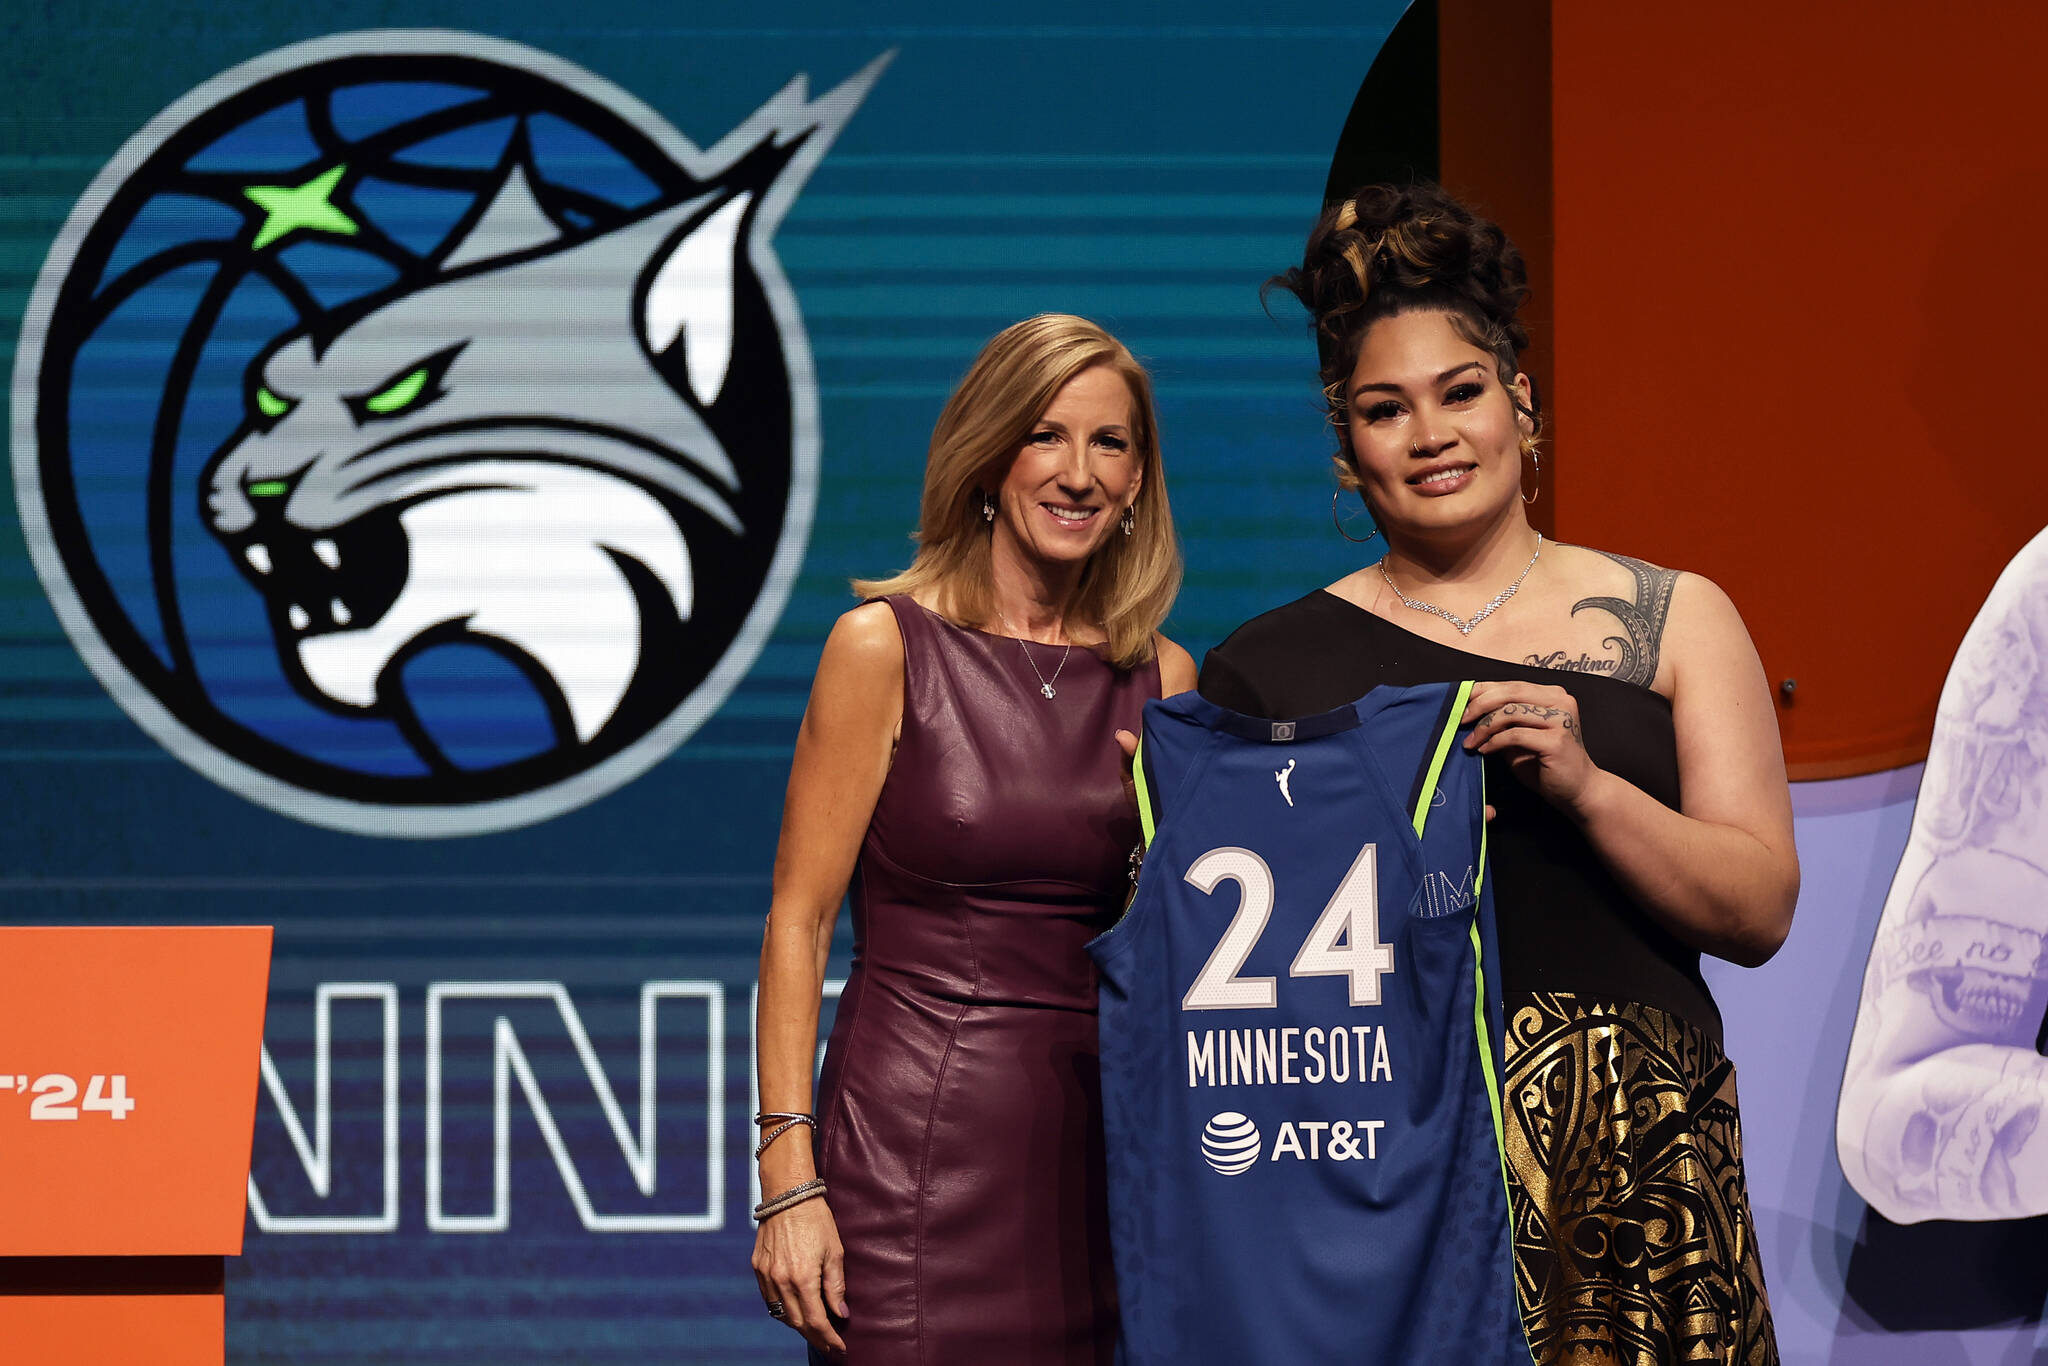 Utah’s Alissa Pili, right, poses for a photo with WNBA commissioner Cathy Engelbert after being selected eighth overall by the Minnesota Lynx during the first round of the WNBA basketball draft on Monday in New York. (AP Photo/Adam Hunger)